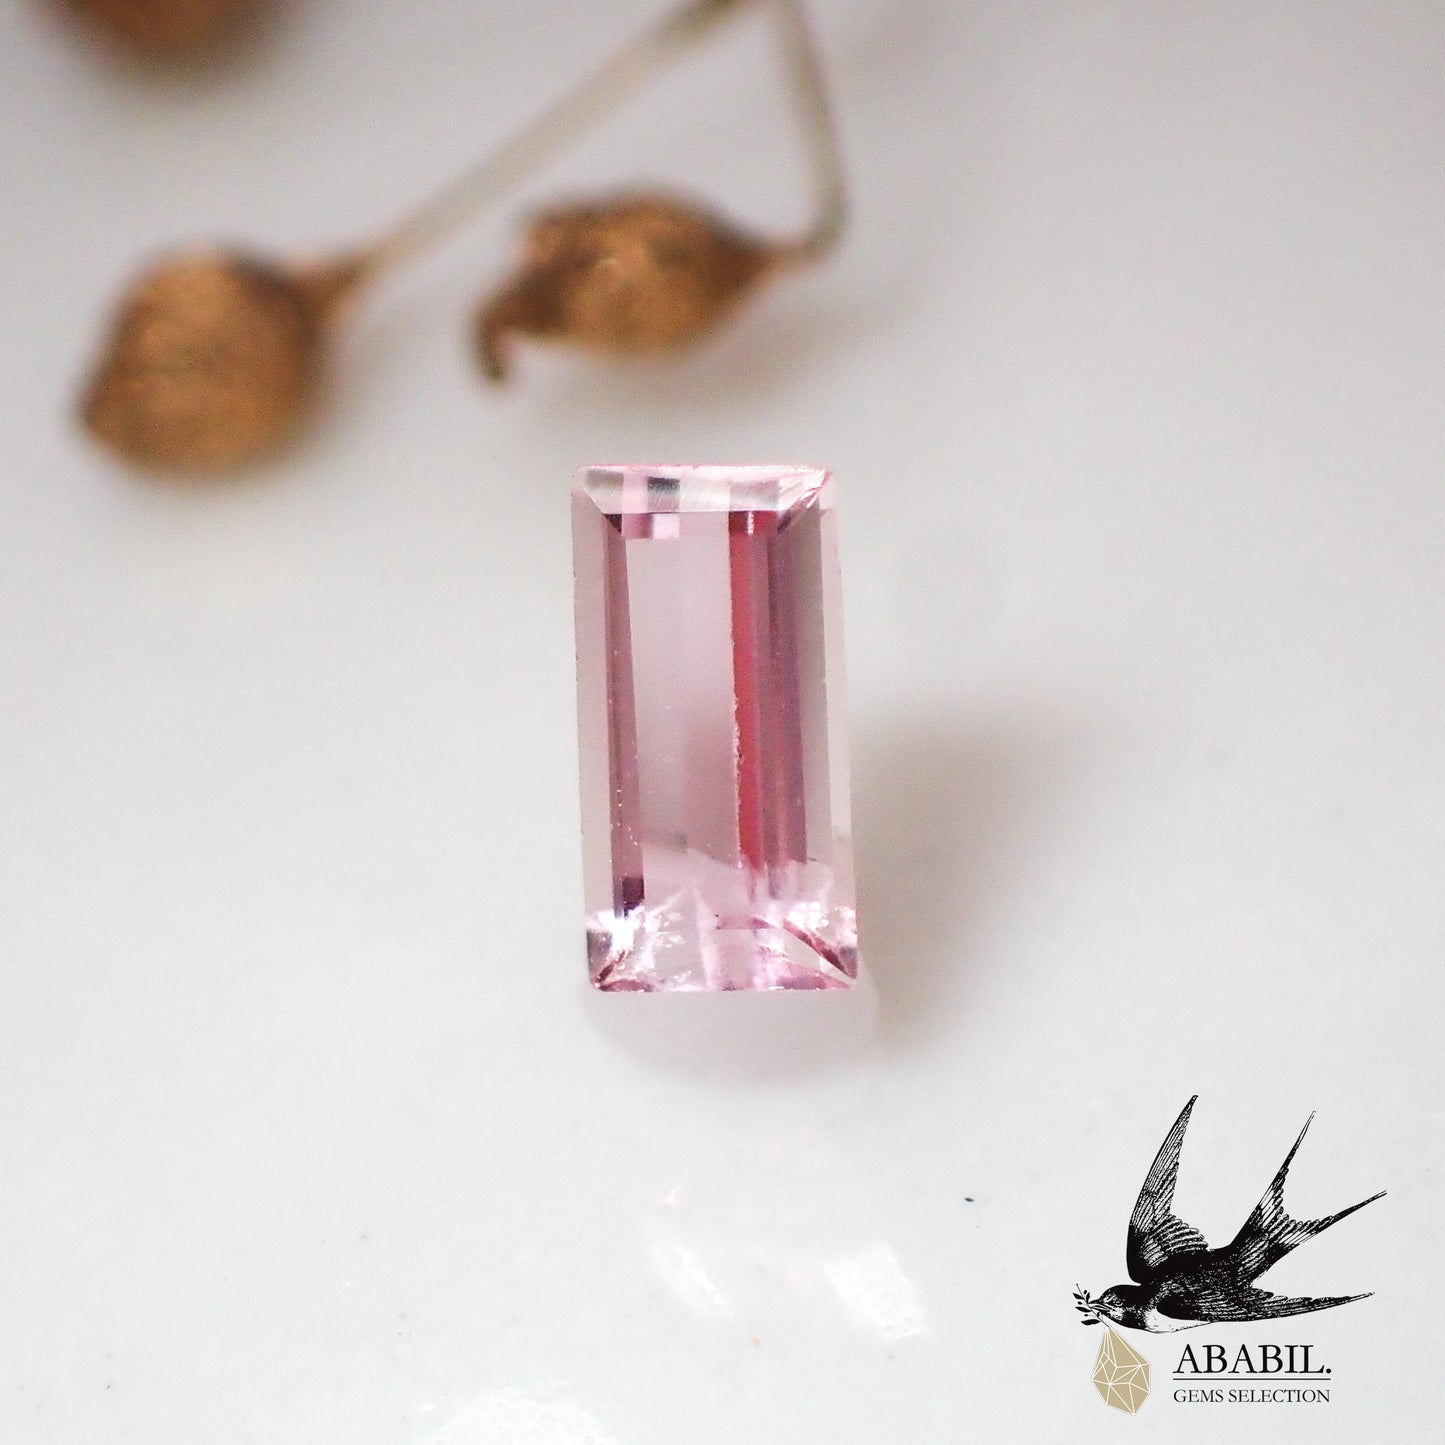 Natural unheated imperial topaz 0.182ct [Brazil] OH type pink 